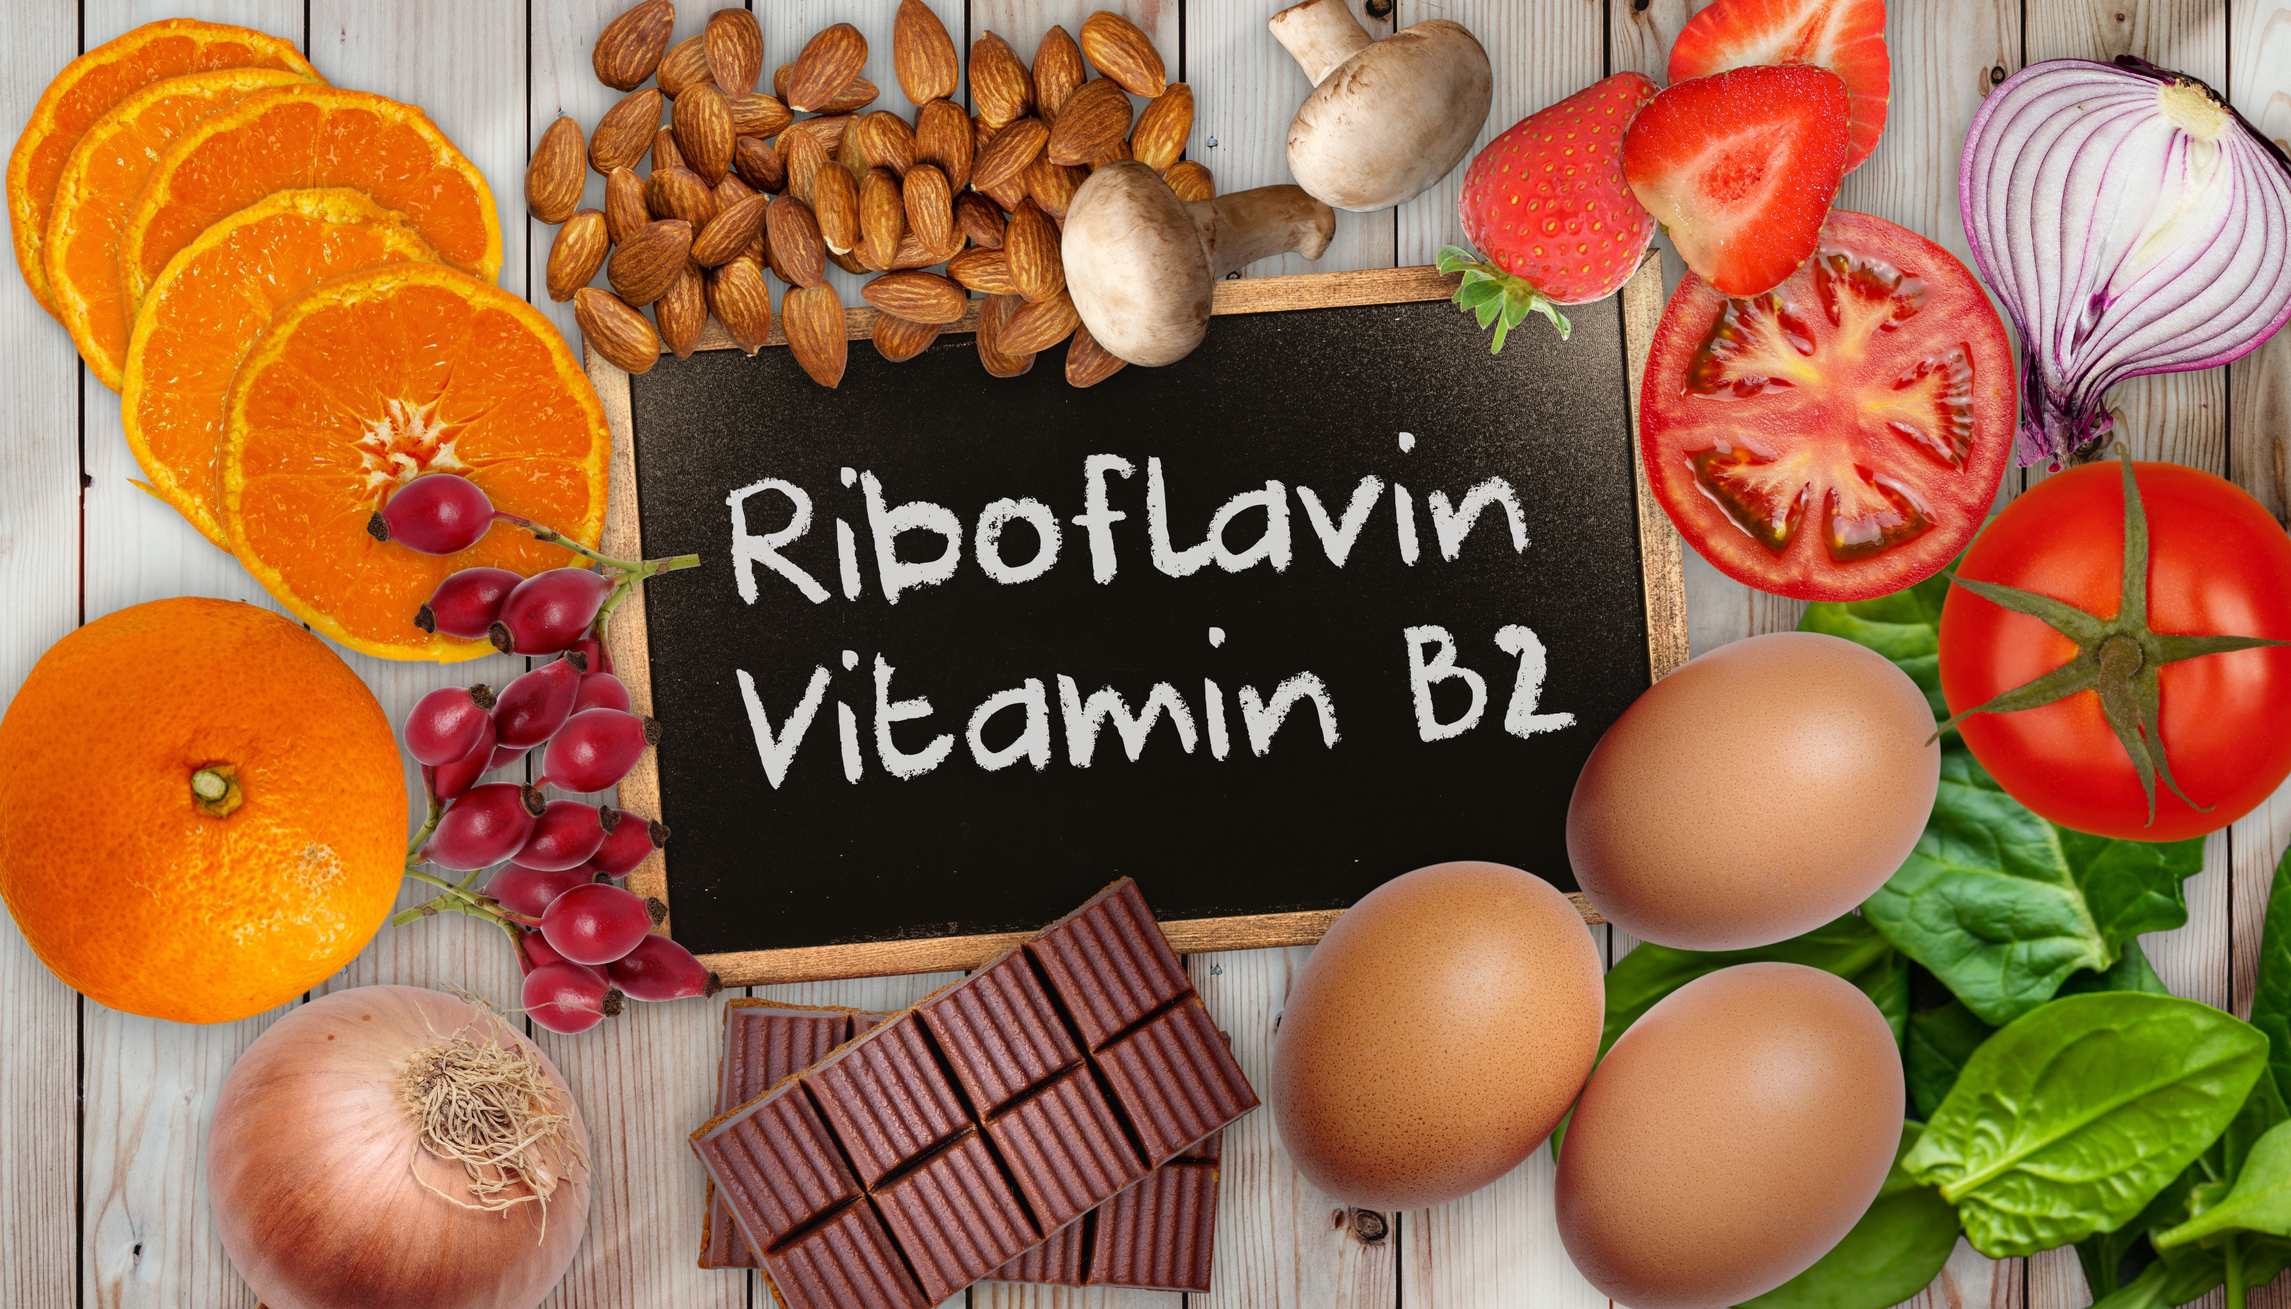 Sources of vitamin B2